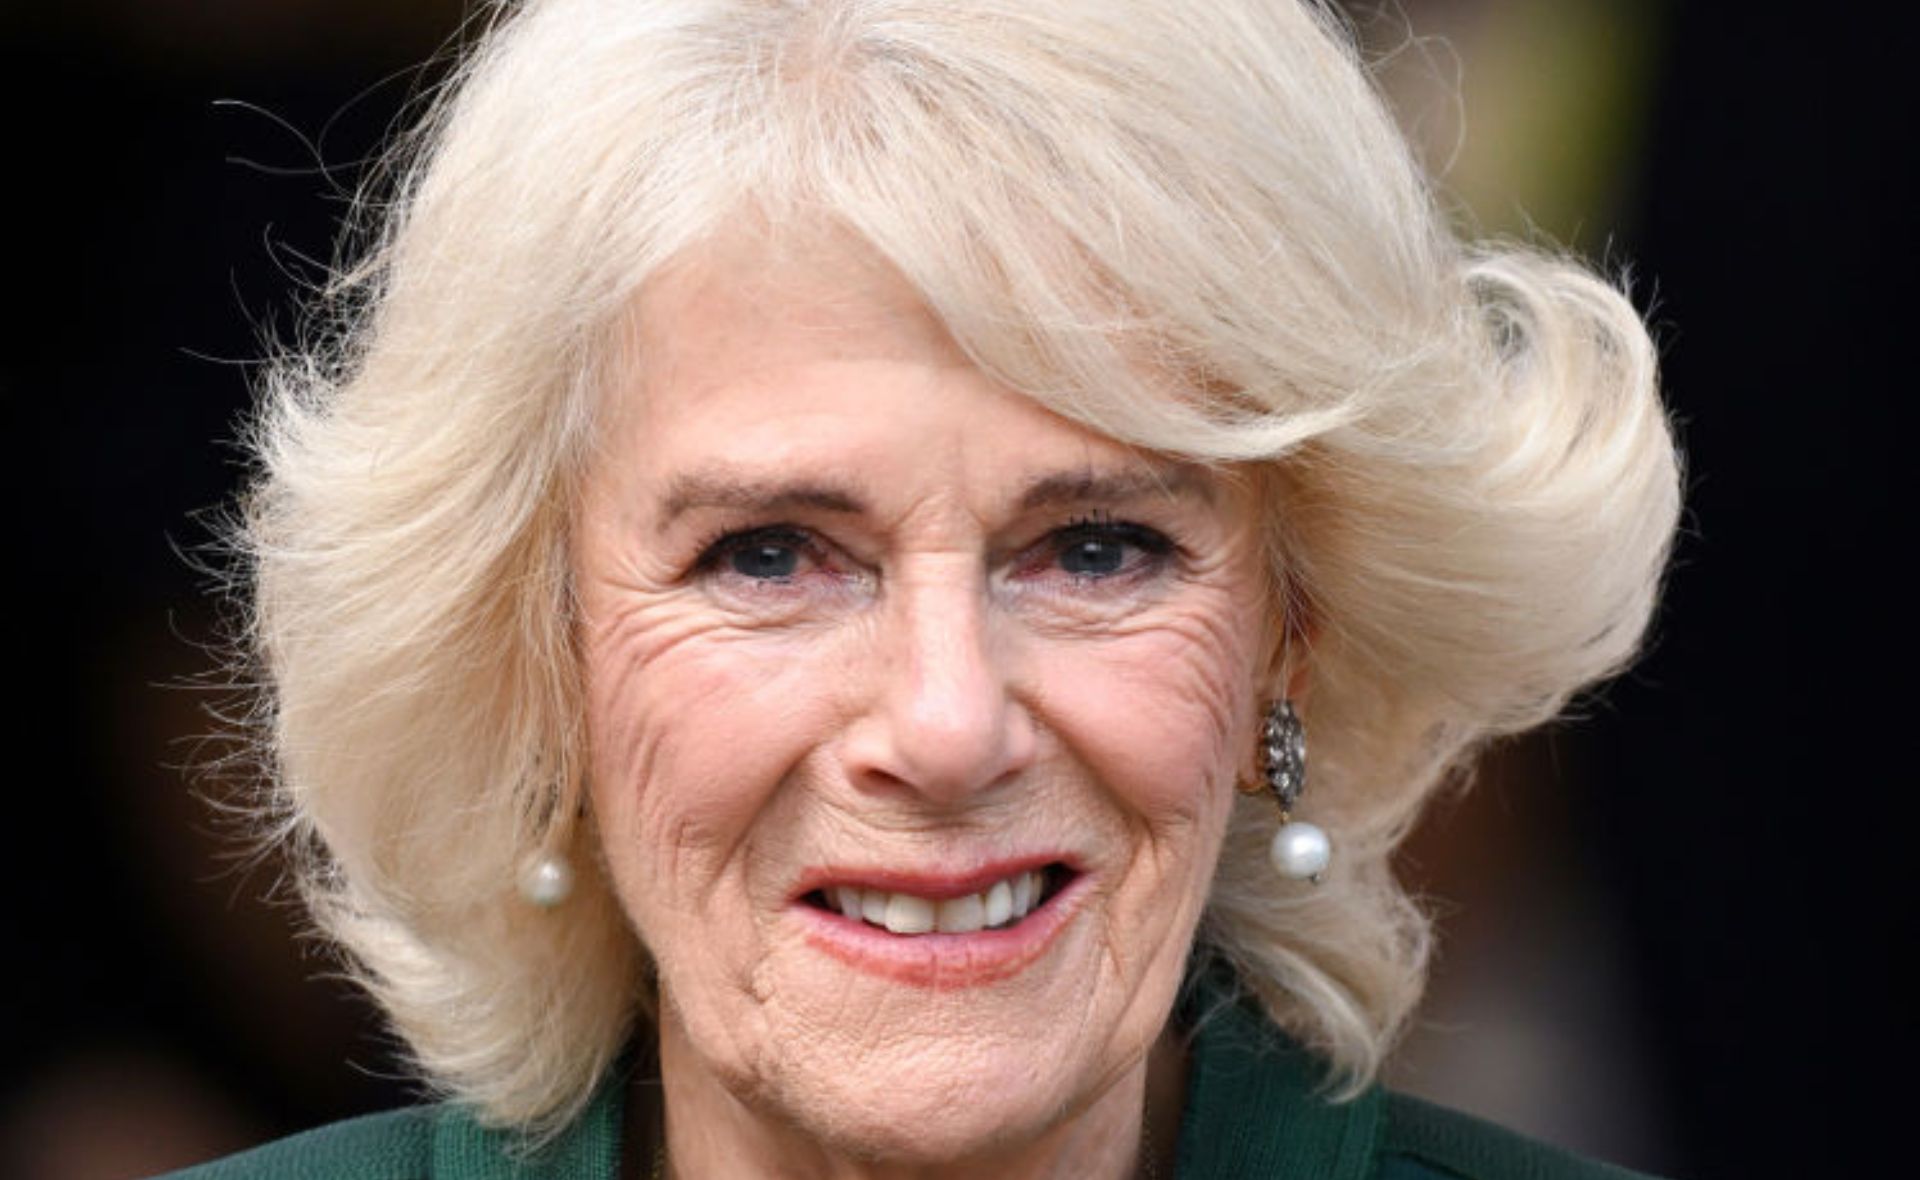 Queen Consort Camilla ditches ‘Ladies in Waiting’ titles